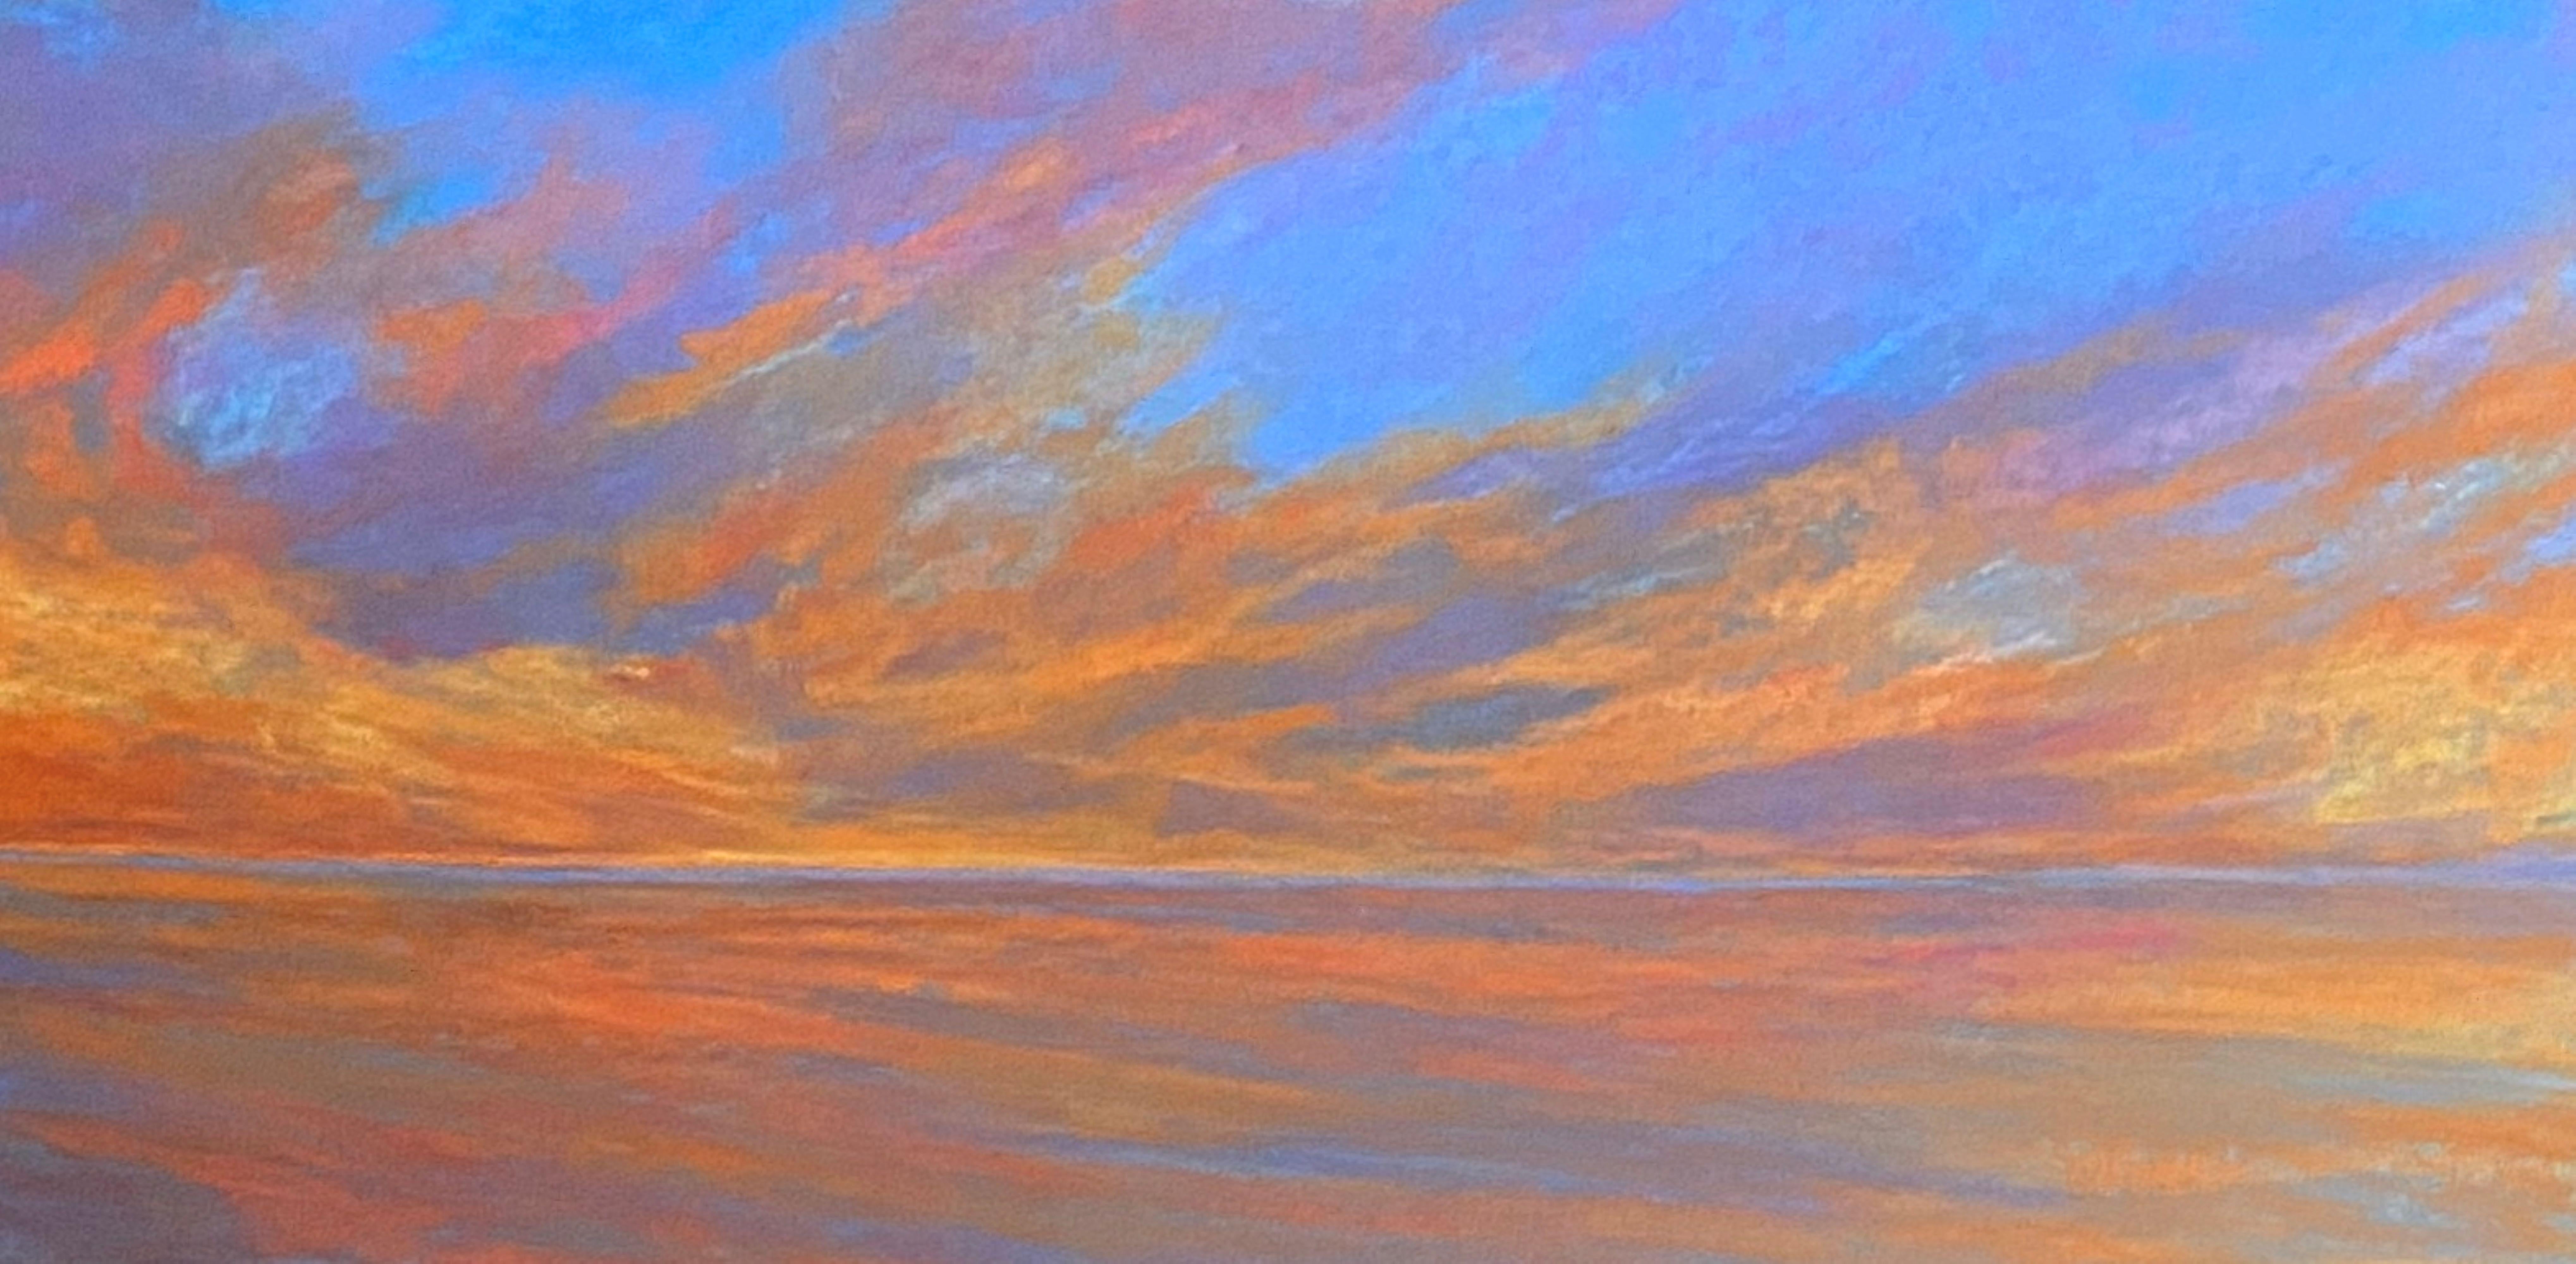 Dina Gardner Landscape Painting - Chasing Ghosts, Original Sunset Painting in Pastel on Board, 2021